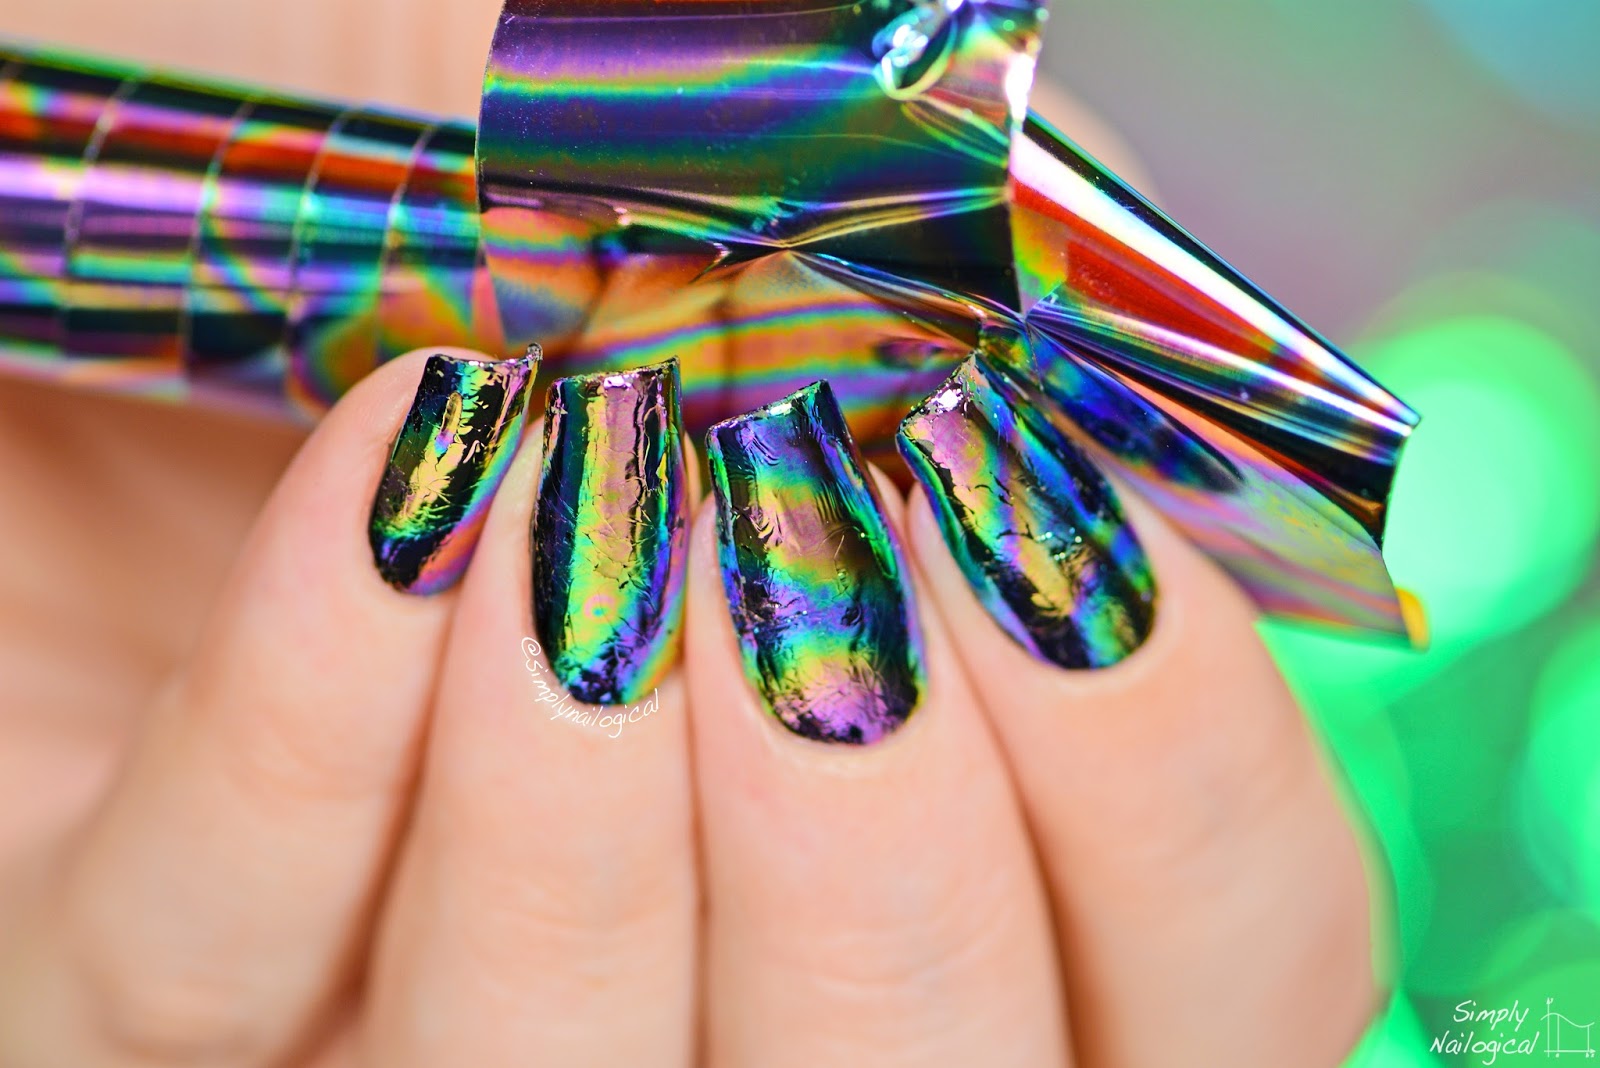 2. How to Create an "Oil Spill" Effect on Your Nails - wide 3